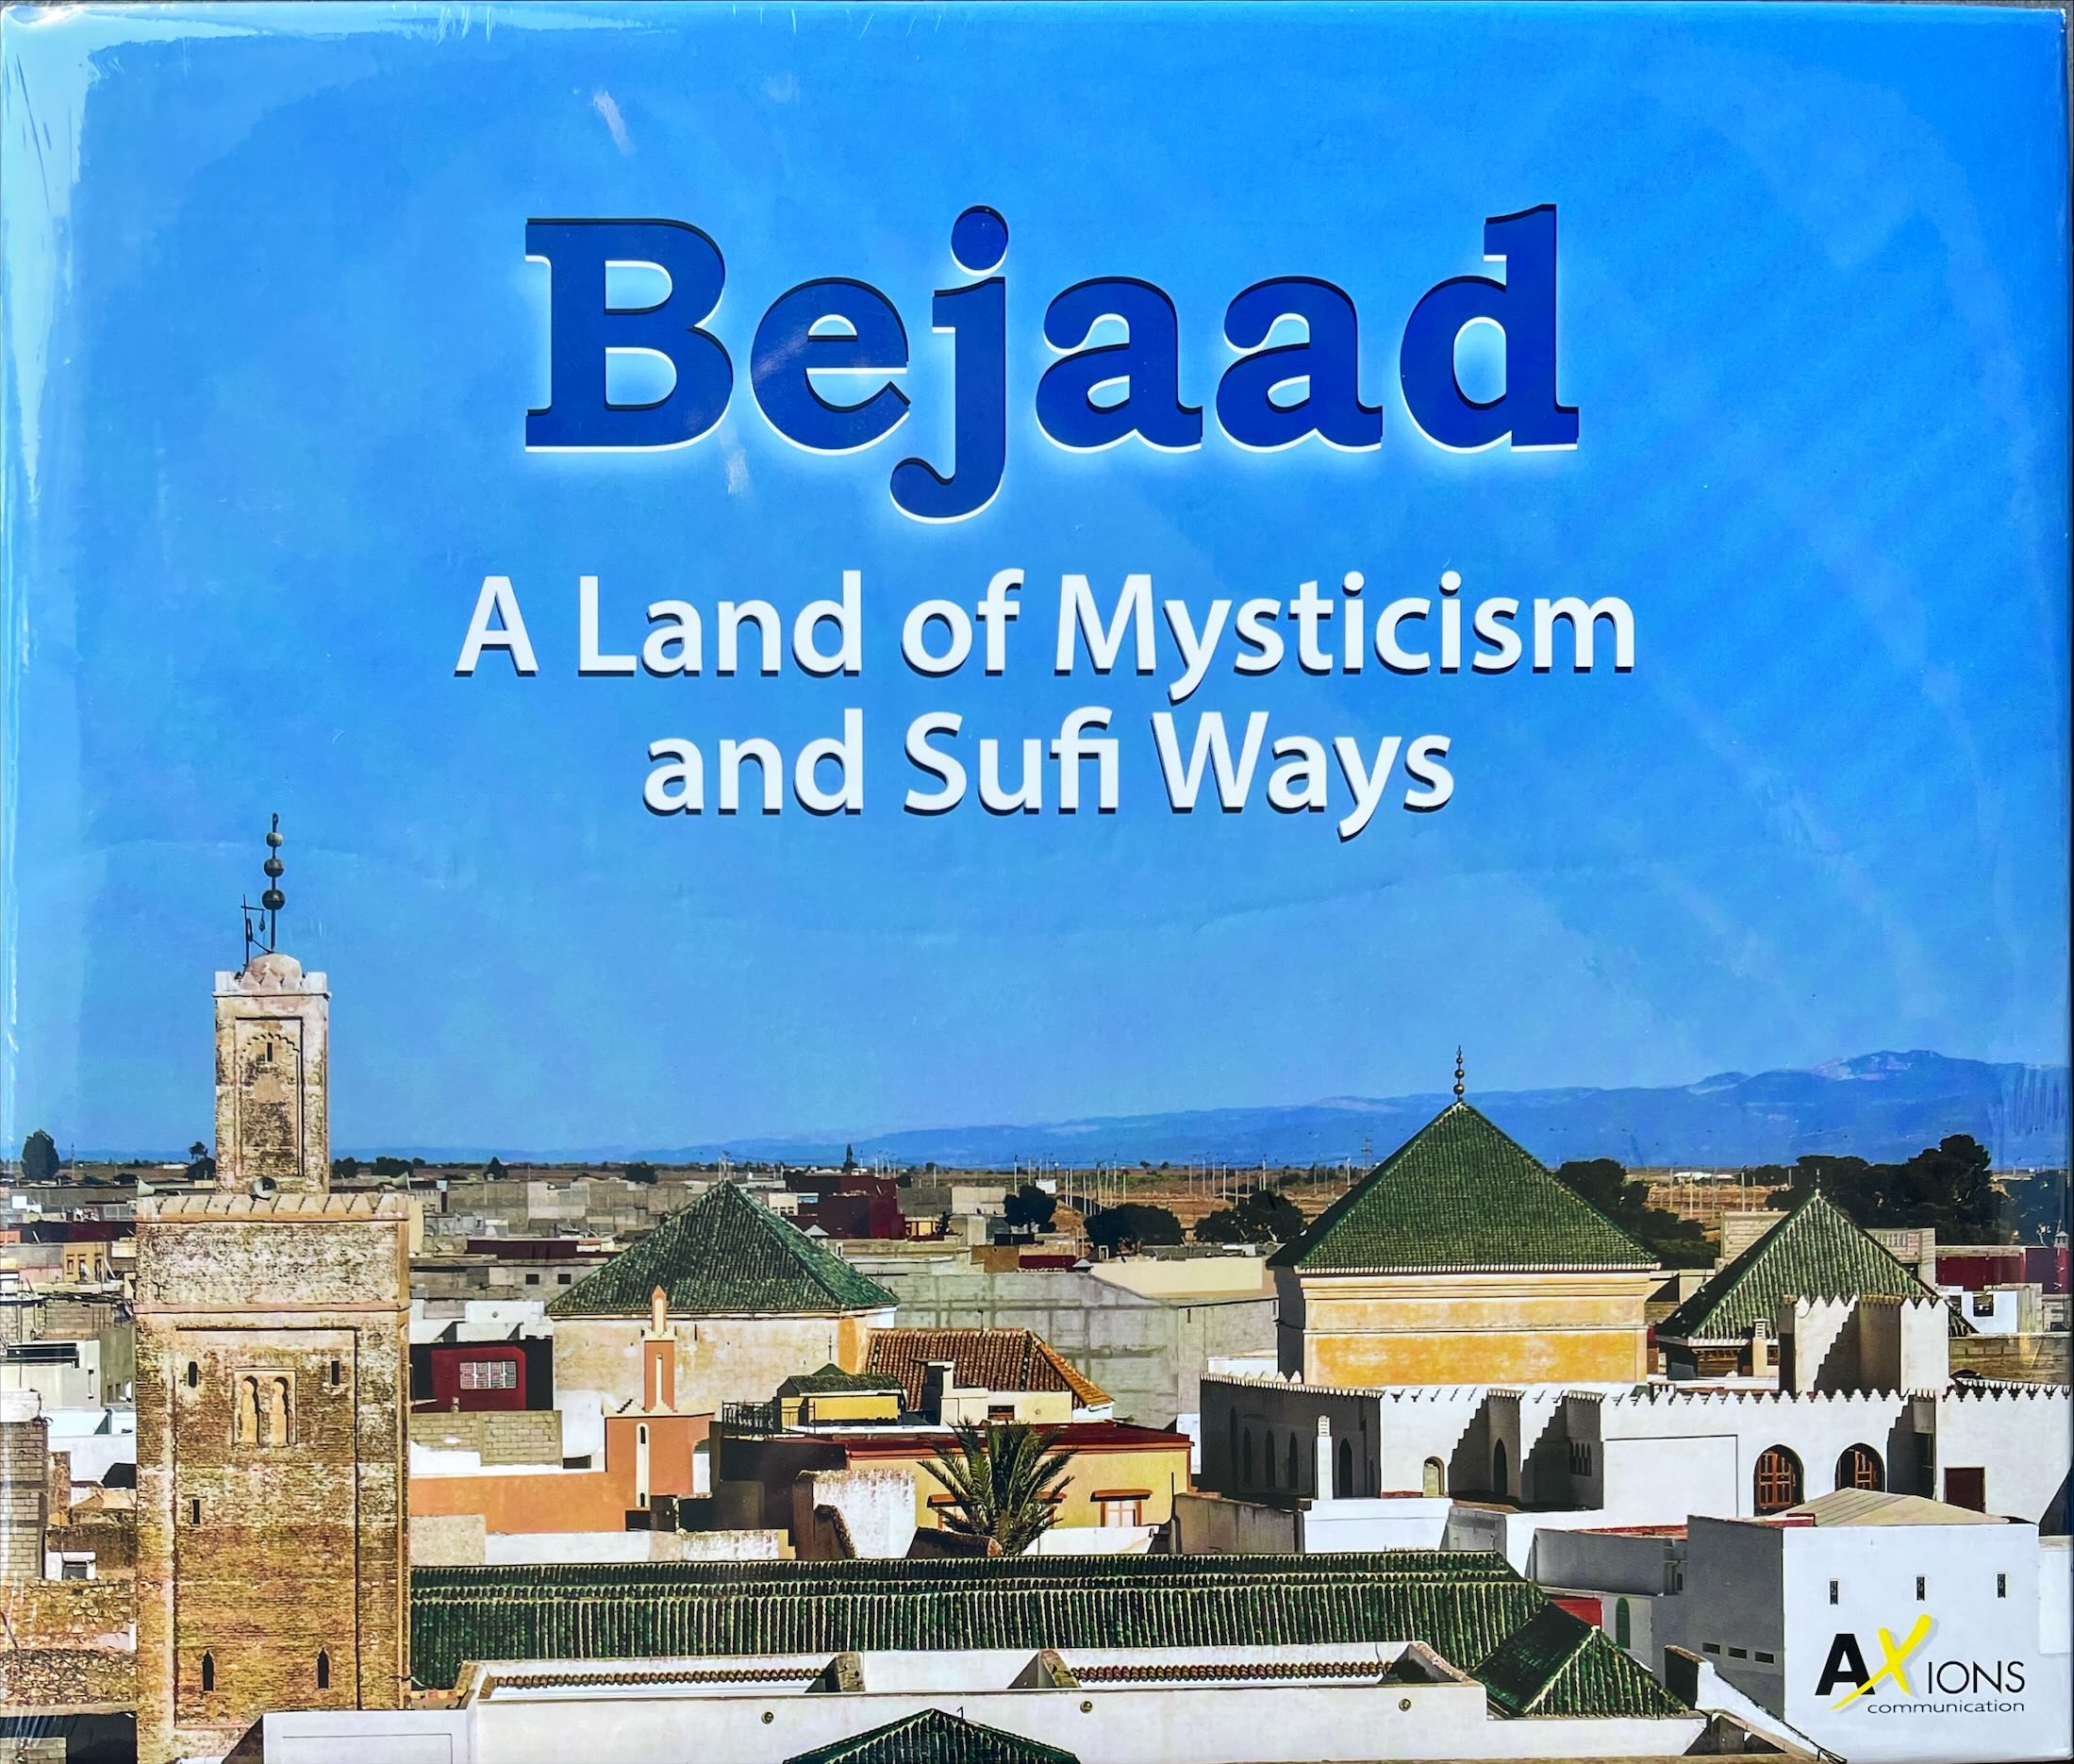 BEJAAD A LAND OF MYSTICISM AND SUFI WAYS